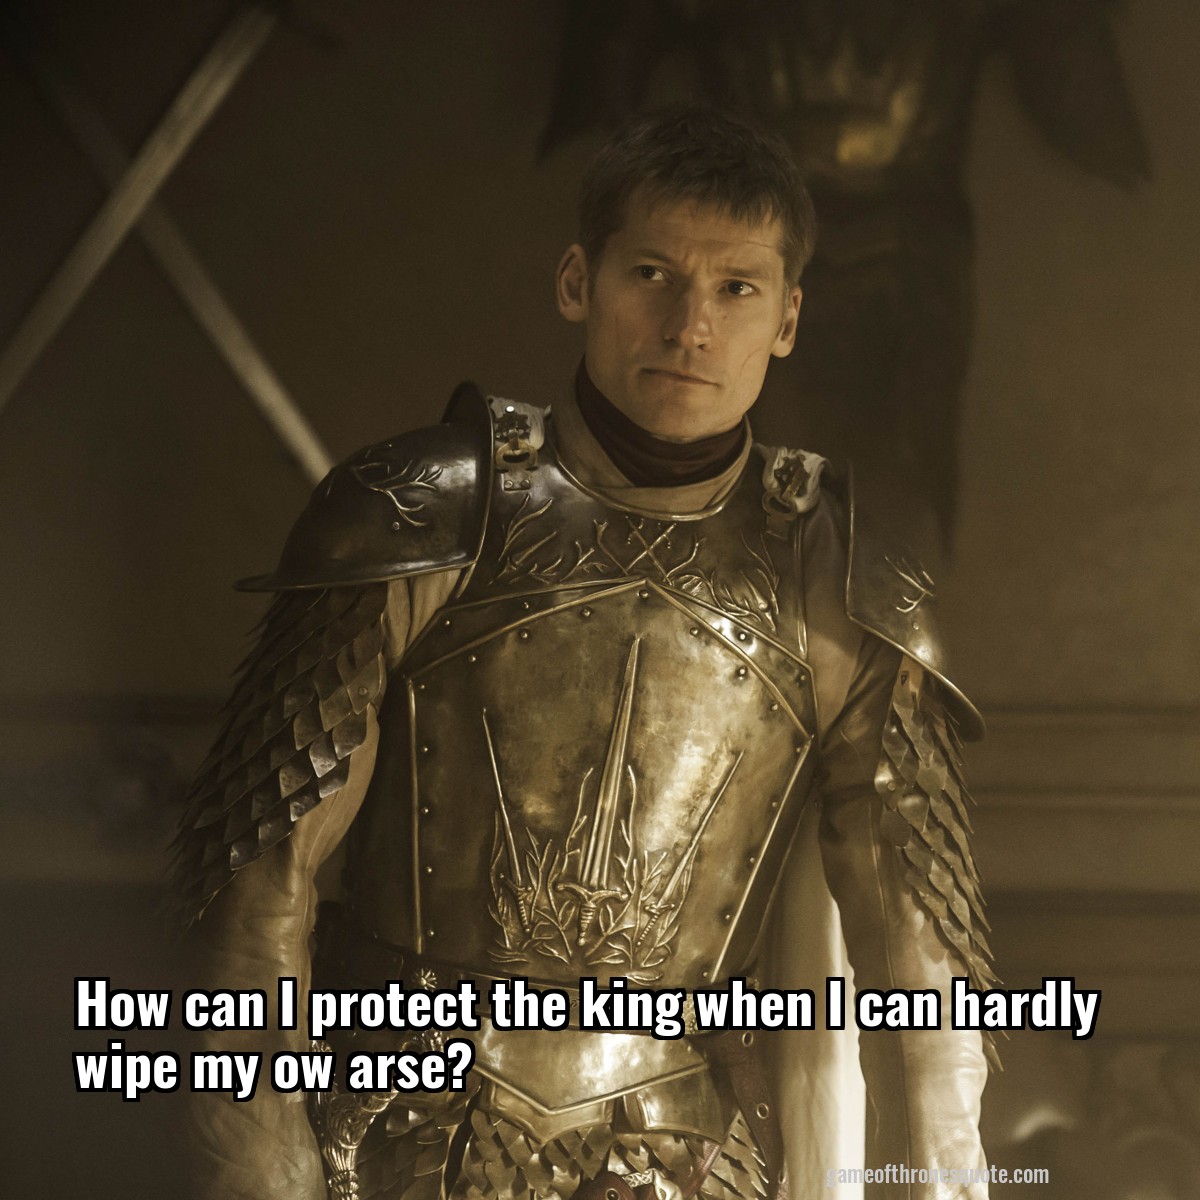 How can I protect the king when I can hardly wipe my ow arse?